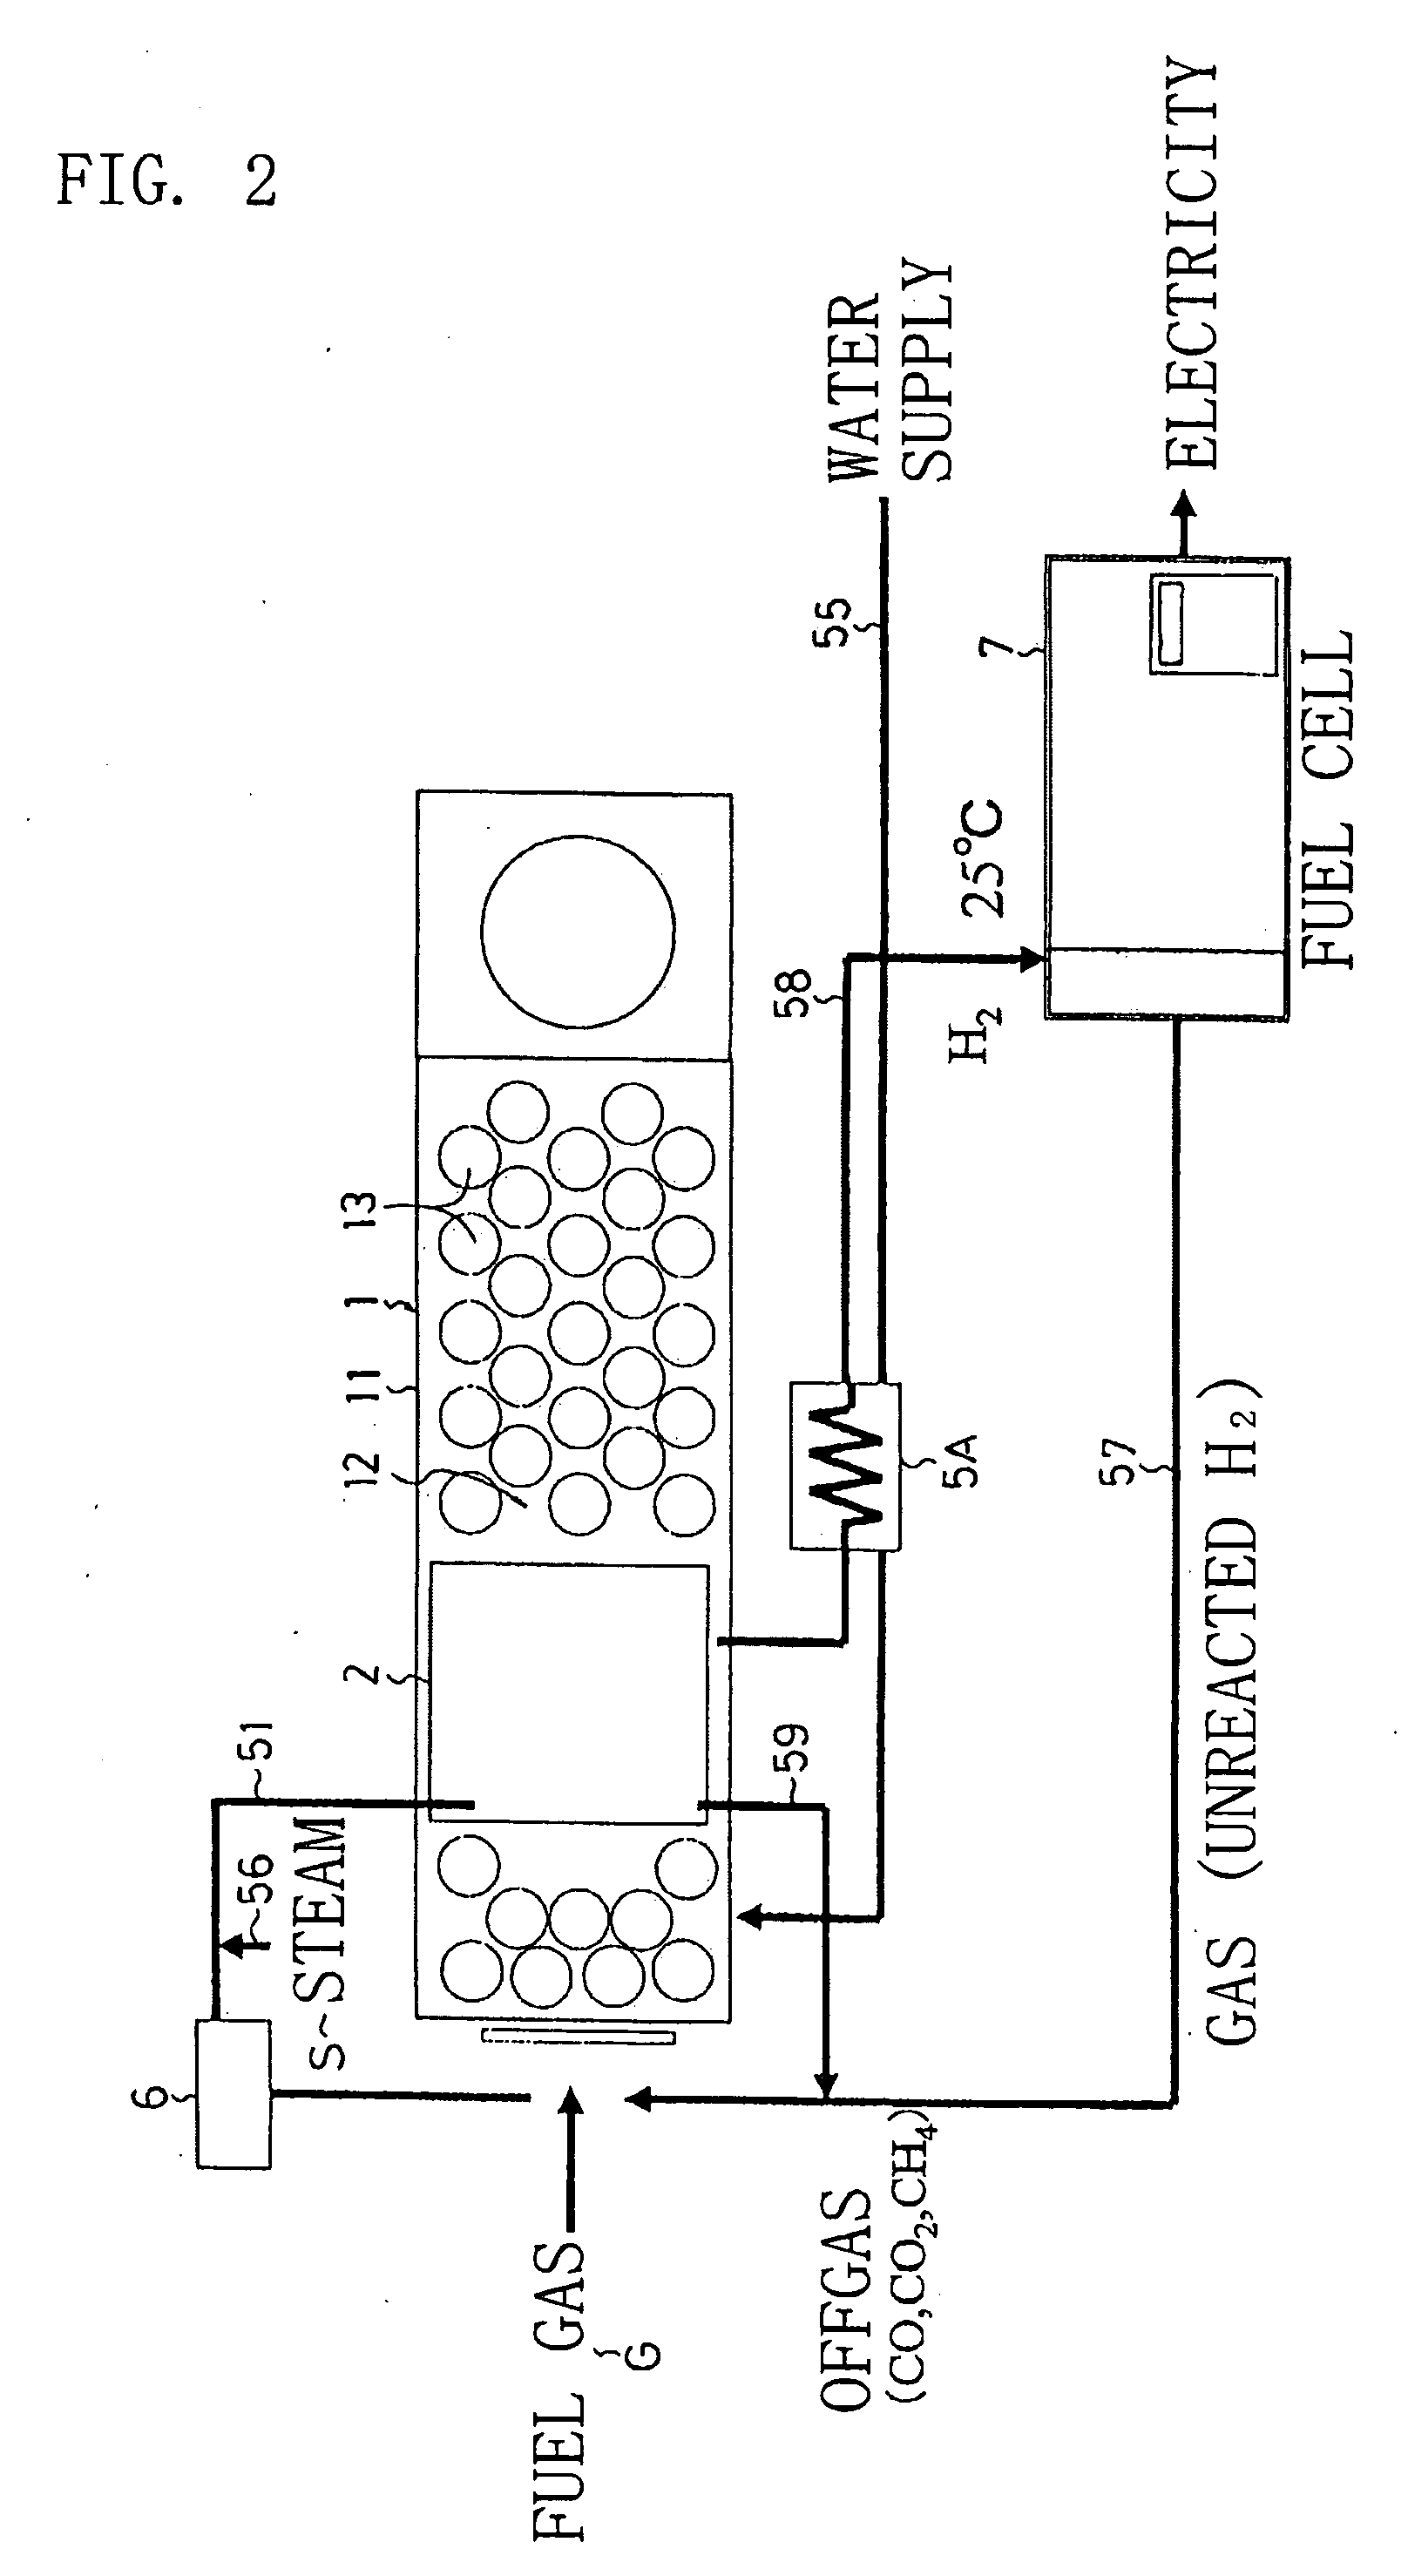 Hydrogen generator and fuel cell system using the same